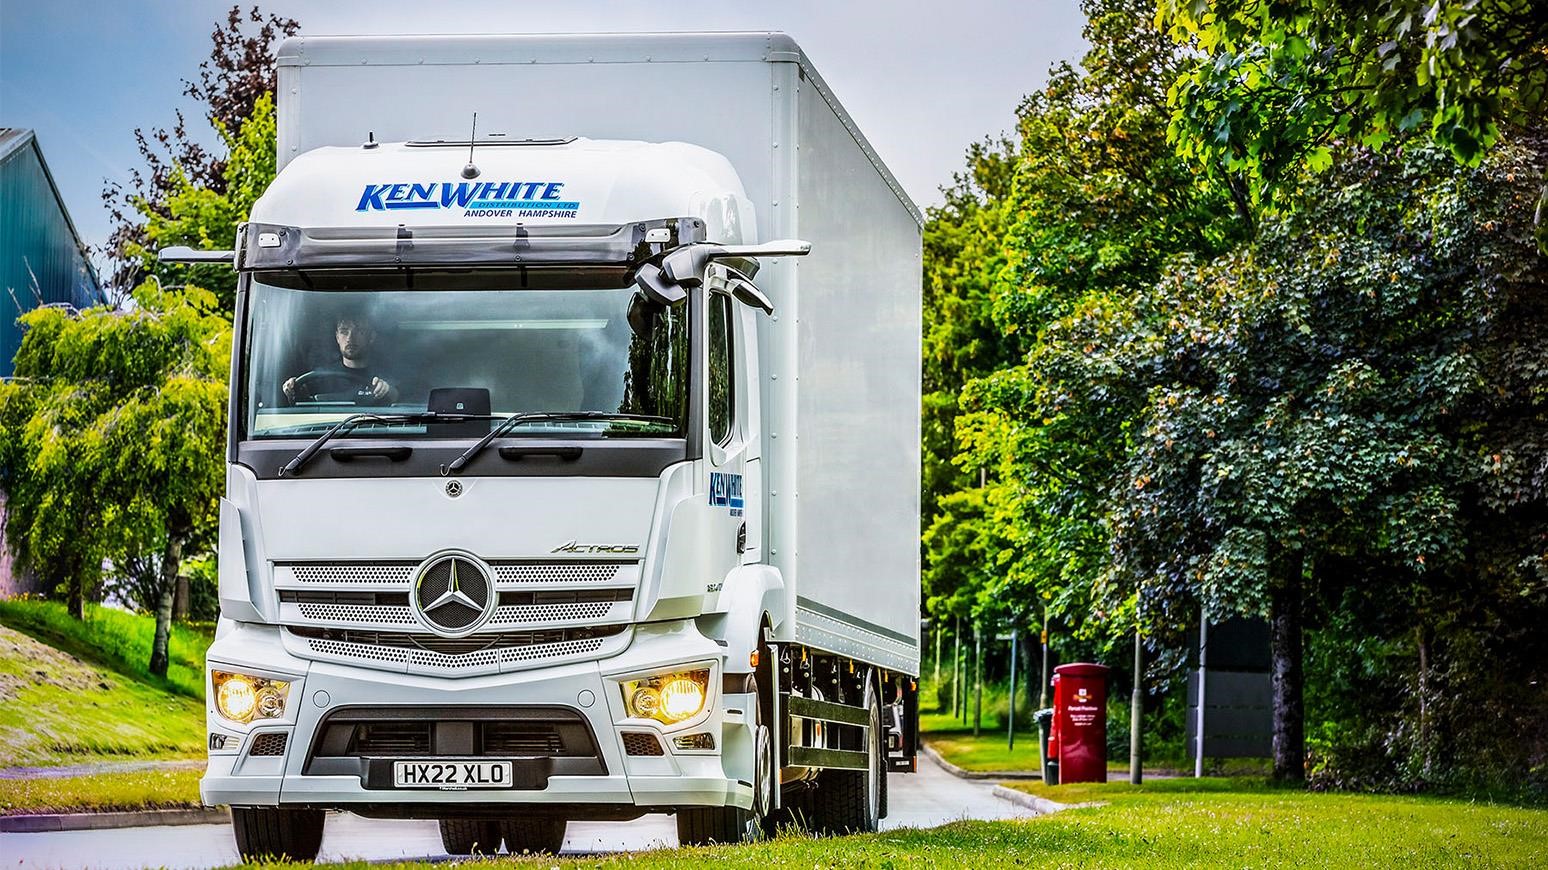 Ken White Distribution Adds 3 New Actros Trucks On Its Way To An All-Mercedes-Benz Fleet